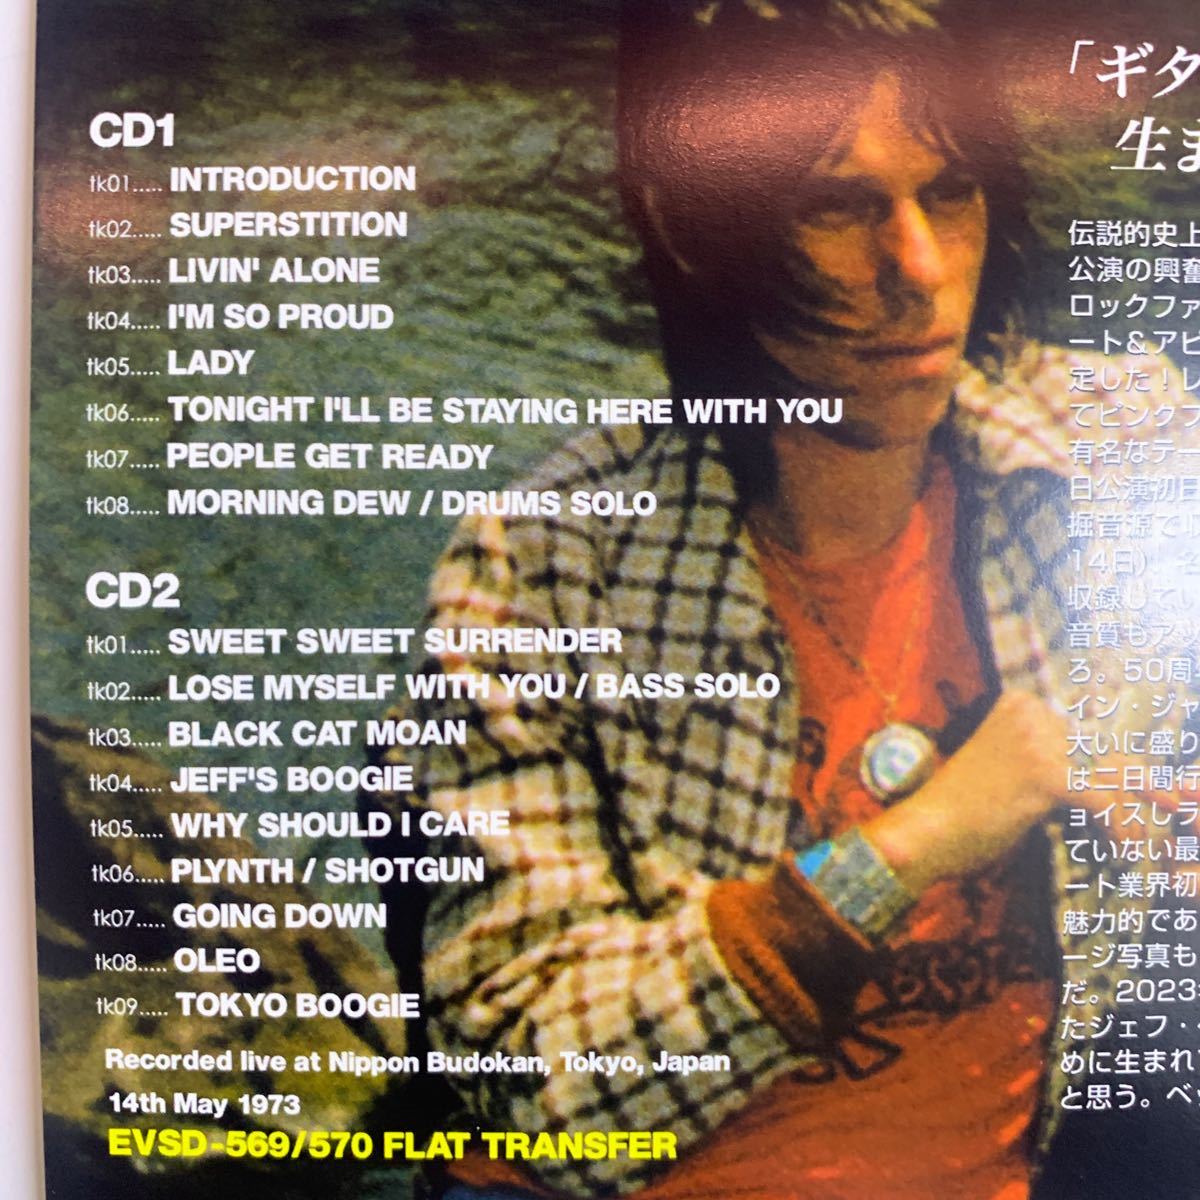 BECK, BOGERT & APPICE BBA / JEFF BECK GROUP / LIVE IN TOKYO 2CD 100セット限定盤！ボックスセットリリースに伴う販売促進用アイテム！_画像3